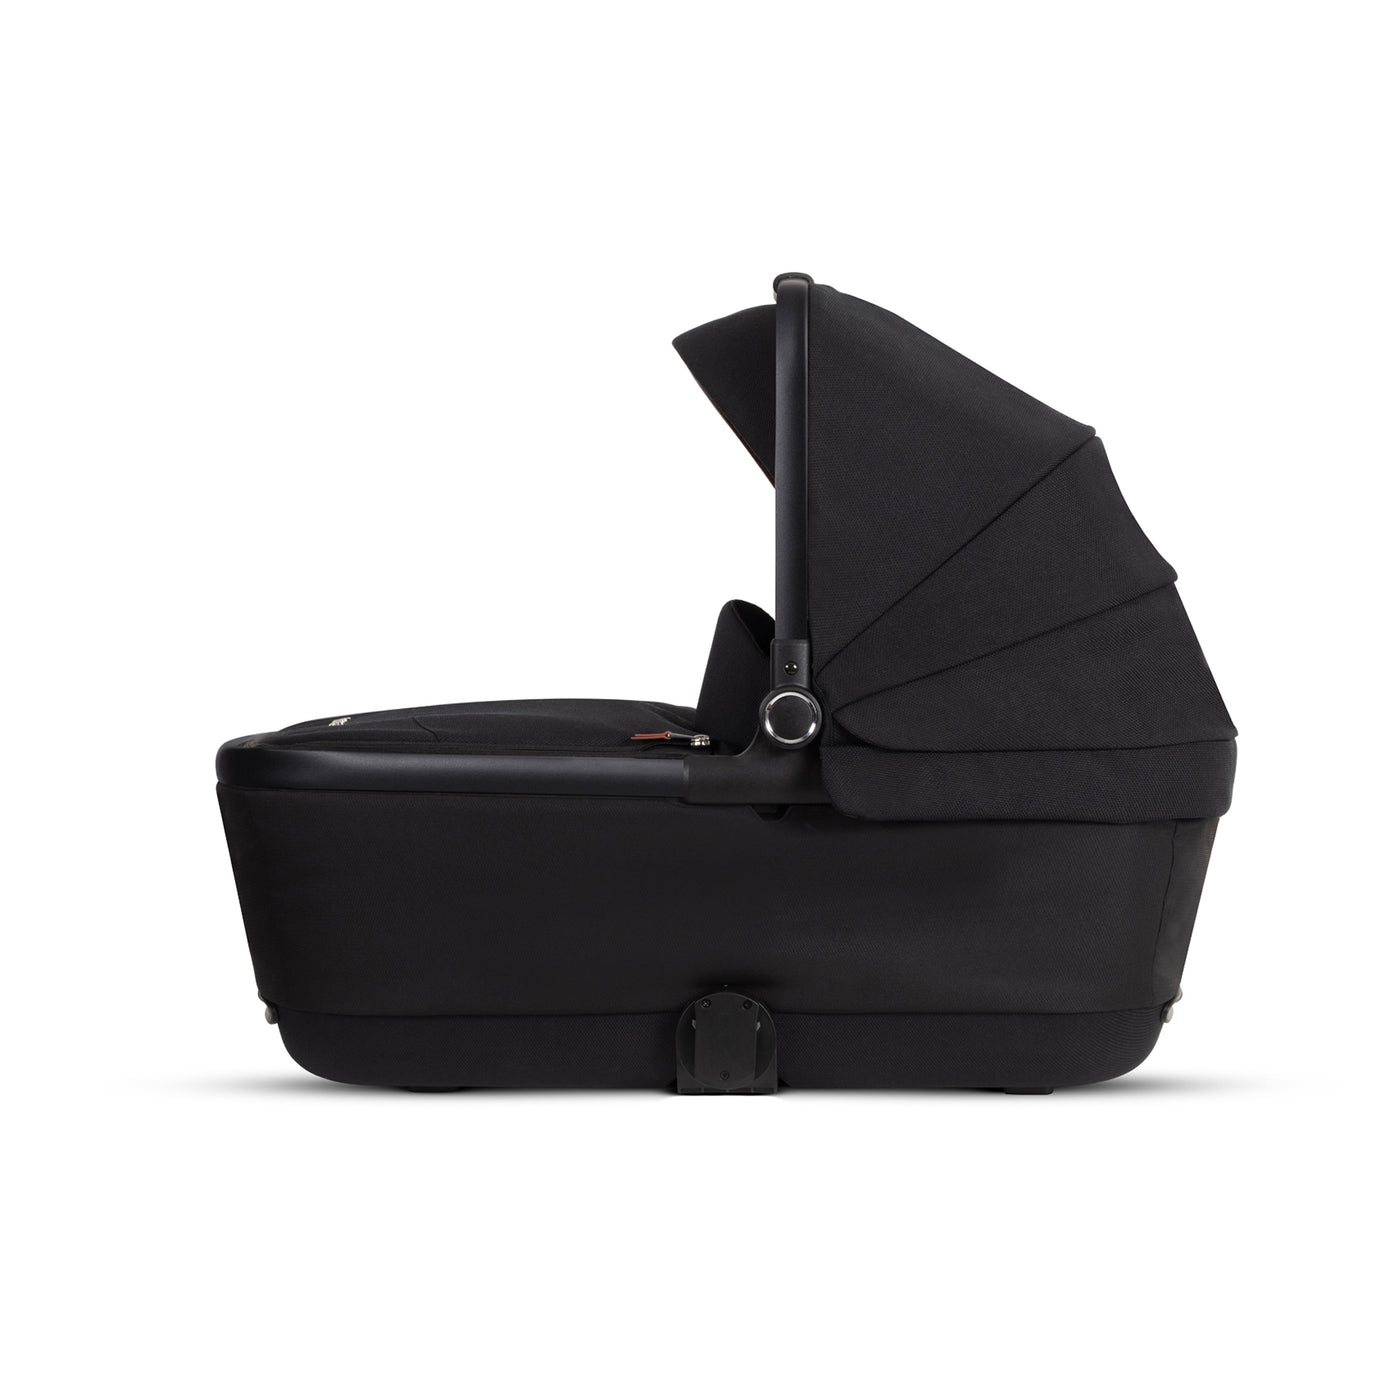 Silver Cross Reef Travel Pack with First Bed Carrycot - Orbit